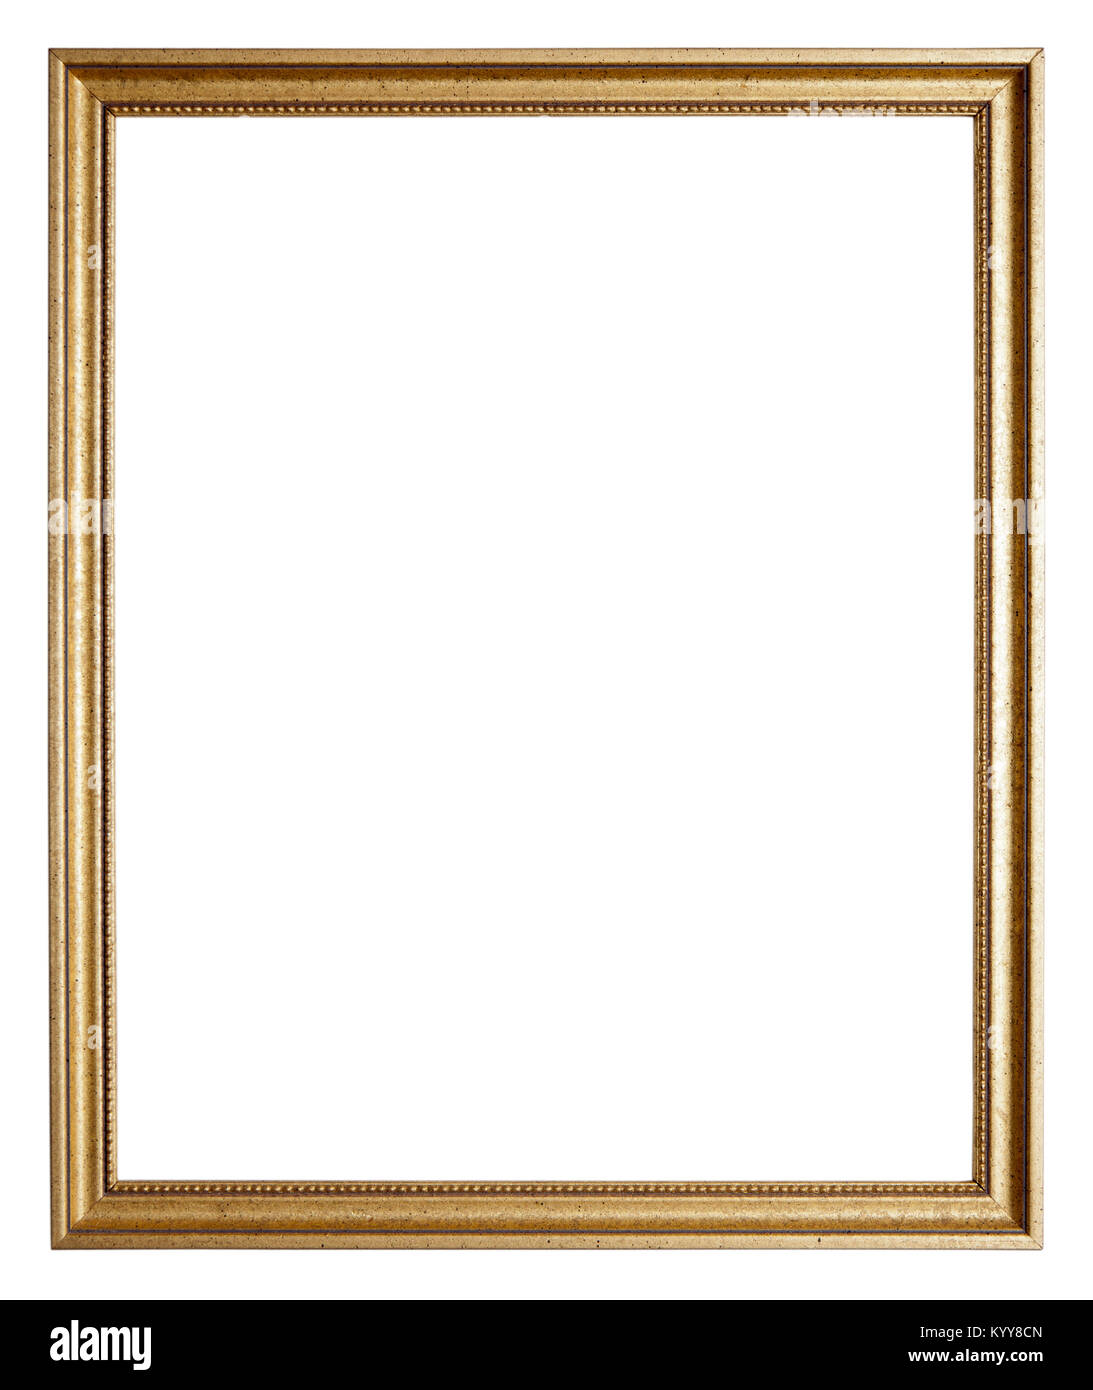 Empty picture frame isolated on white, landscape format, in a distressed gilt finish Stock Photo